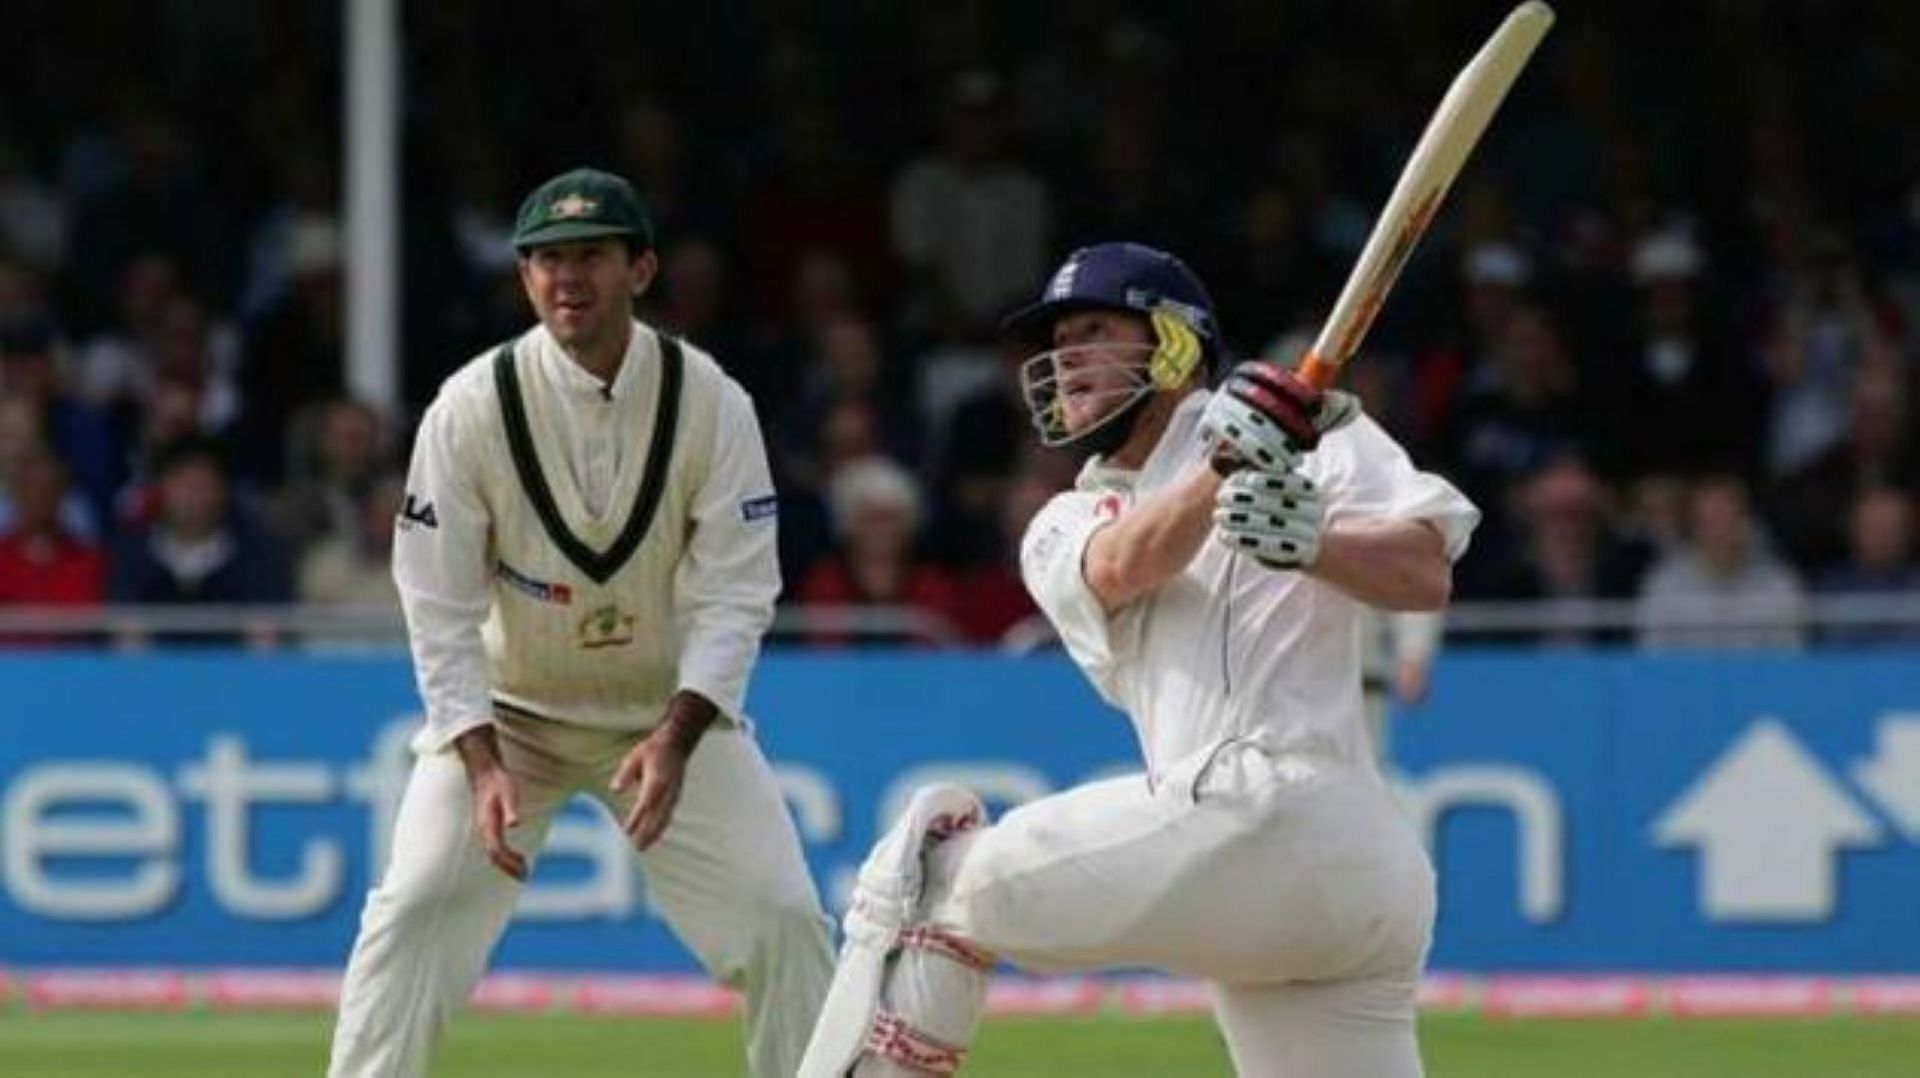 Flintoff was the hero for England in their famous Ashes 2005 win